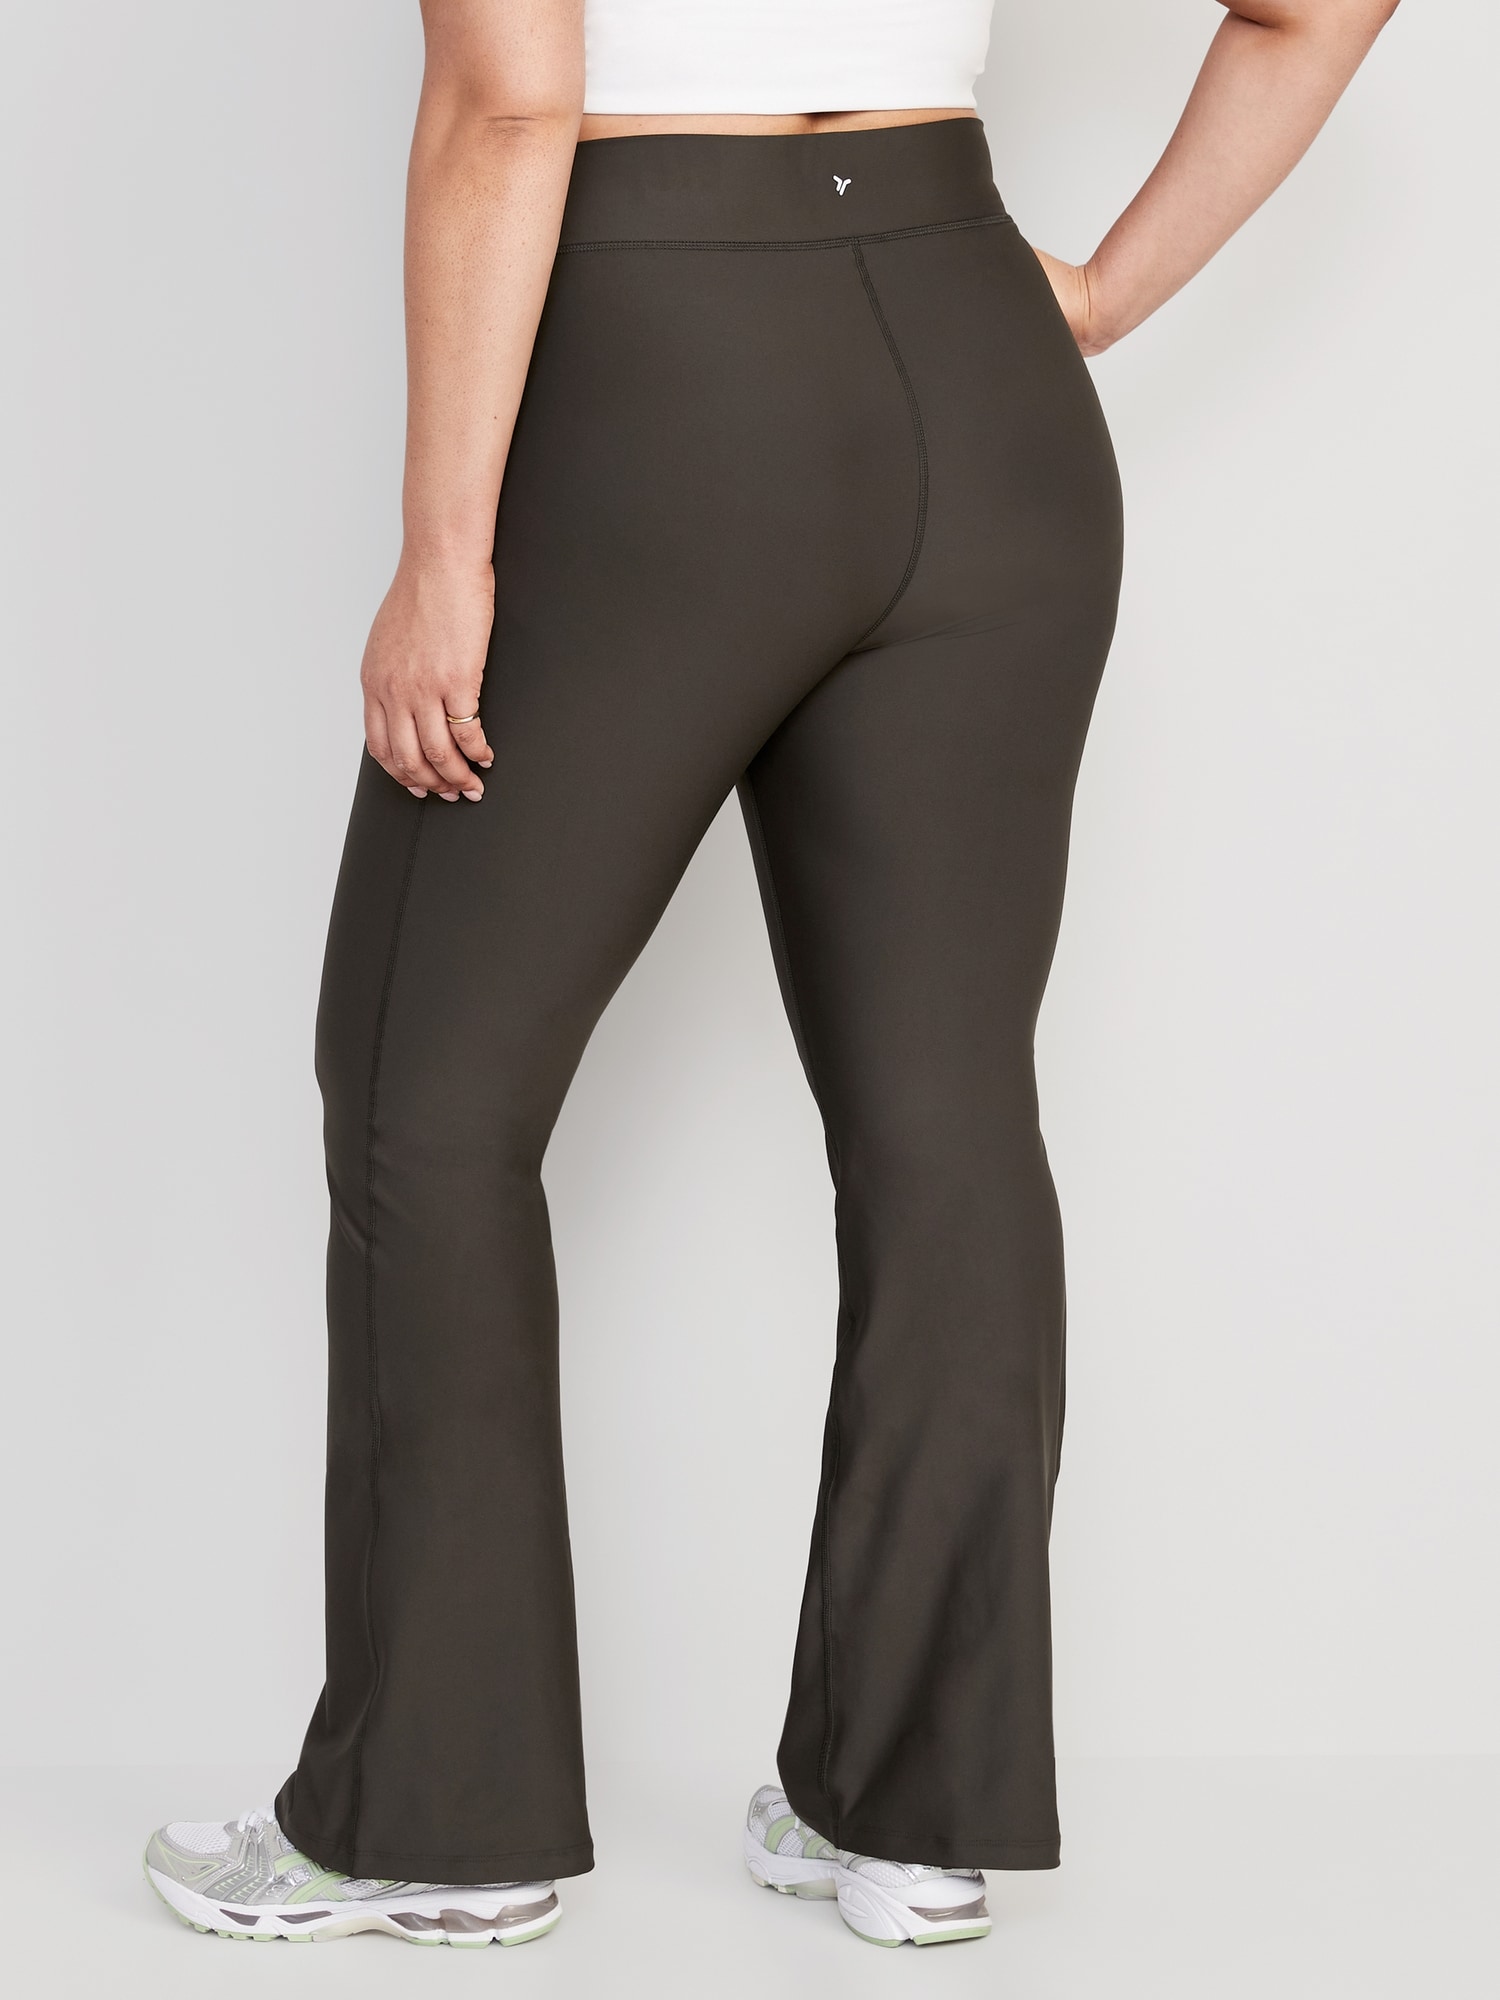 Extra High-Waisted PowerSoft Flare Leggings for Women | Old Navy